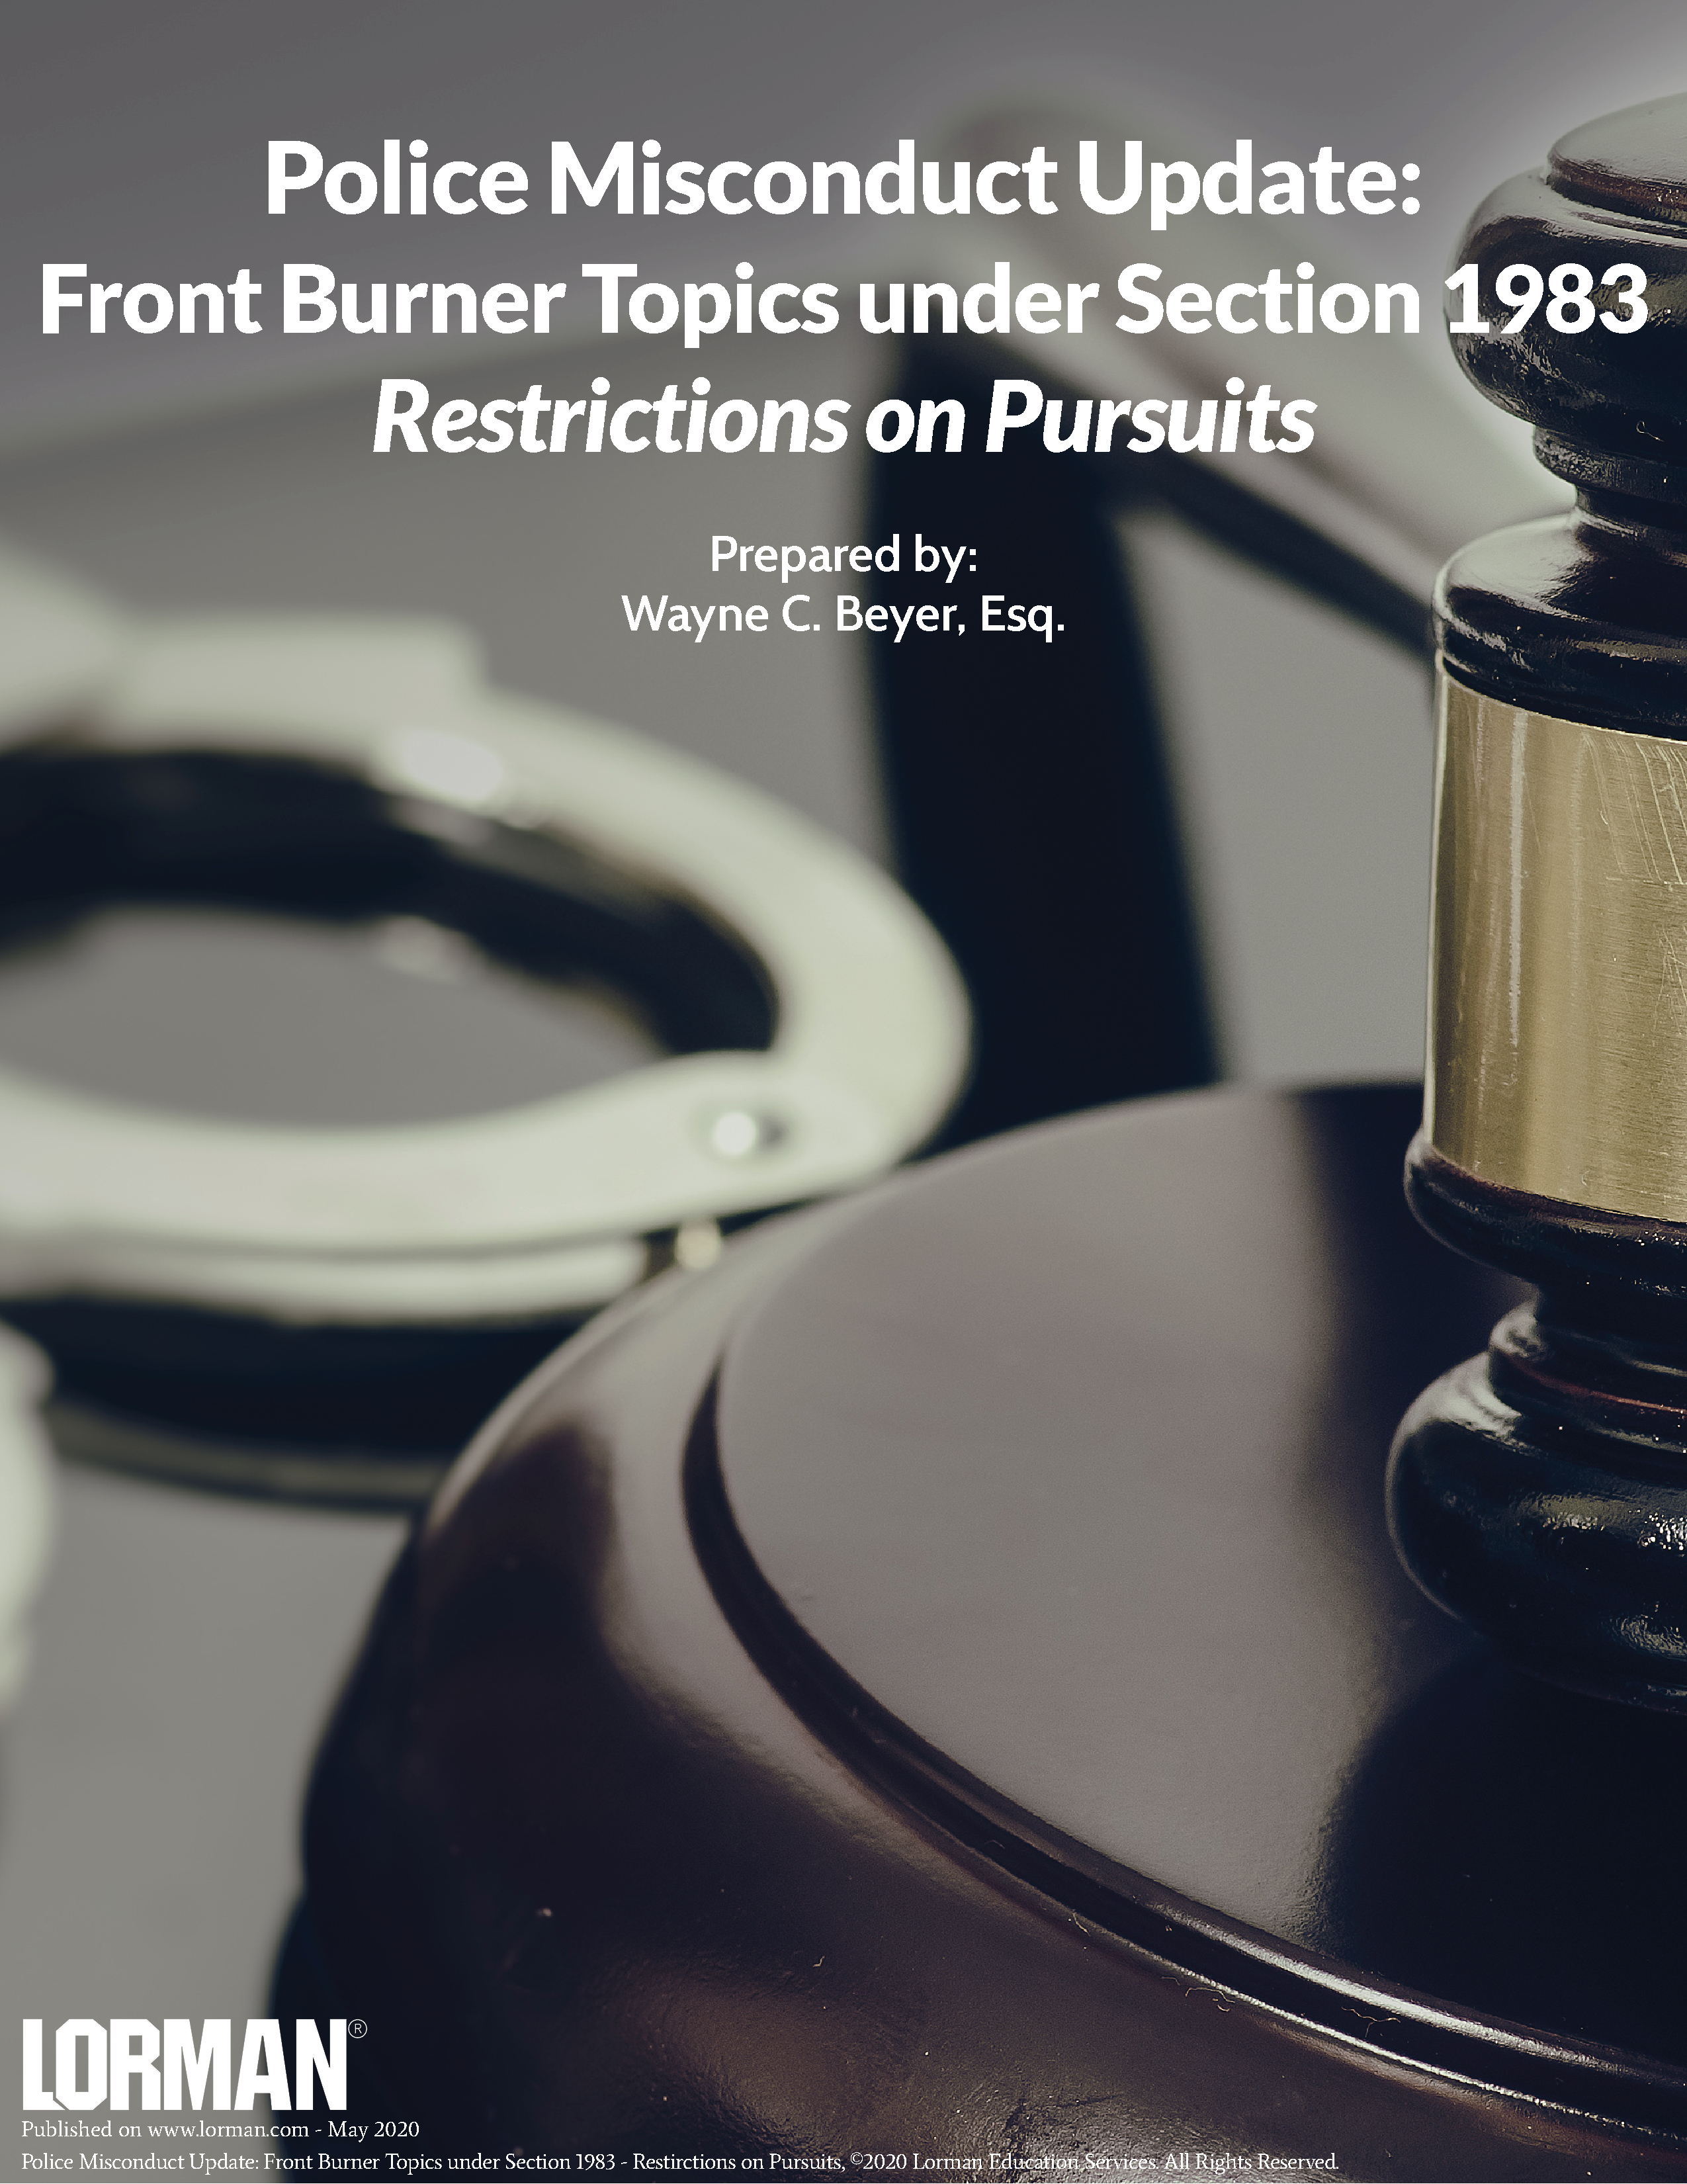 Police Misconduct Update: Front Burner Topics under Section 1983 - Restrictions on Pursuits